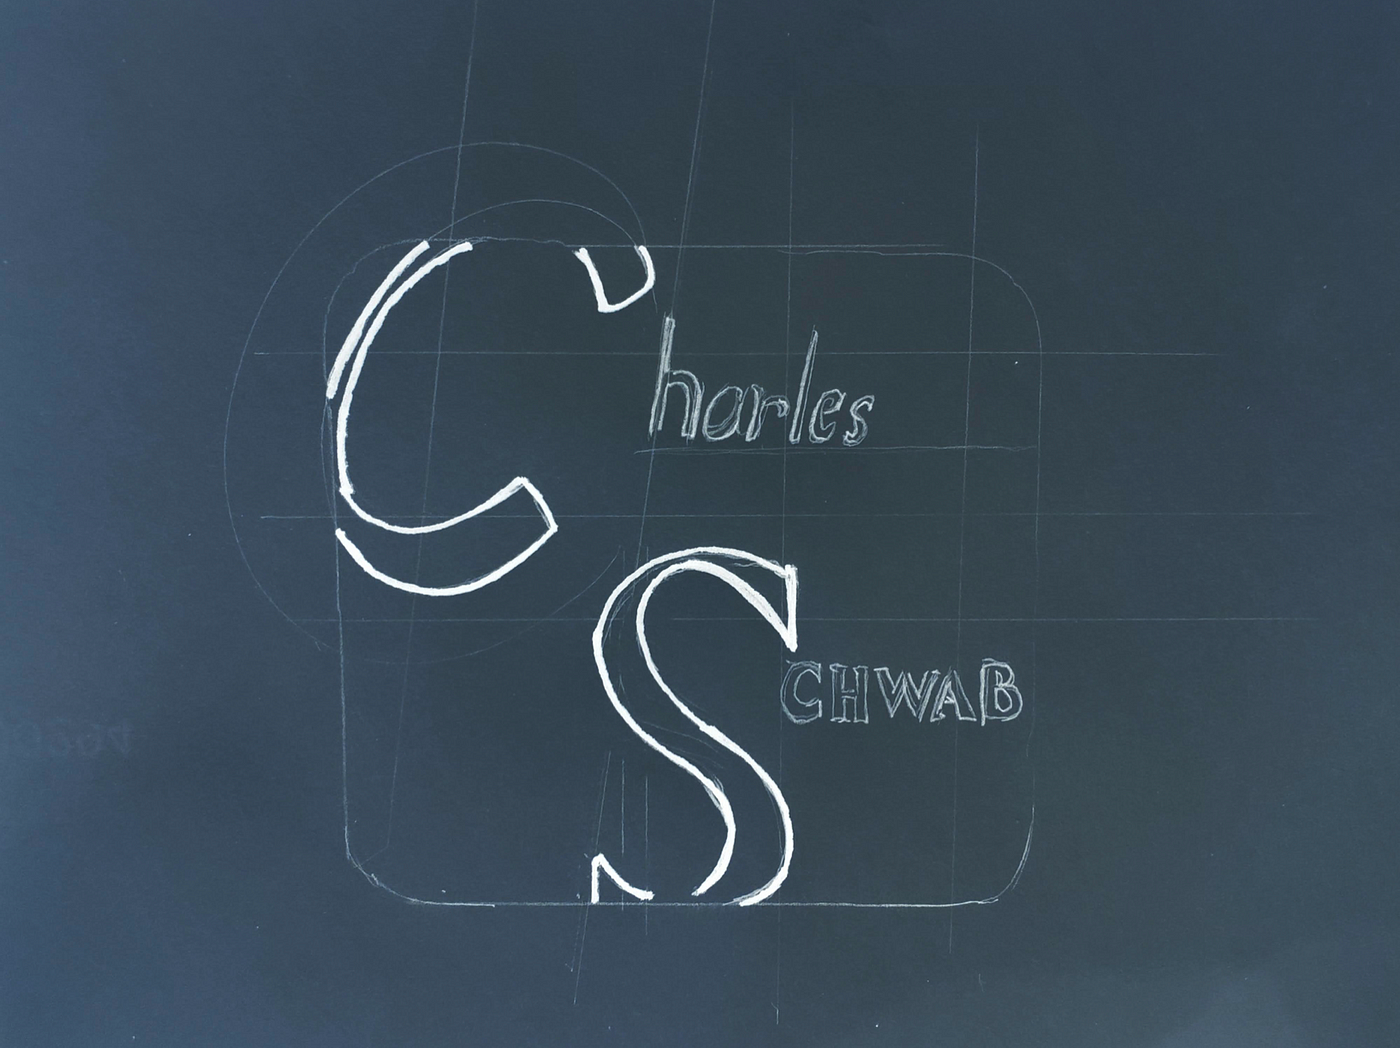 New Charles Schwab logo sktching using pencil and paper.